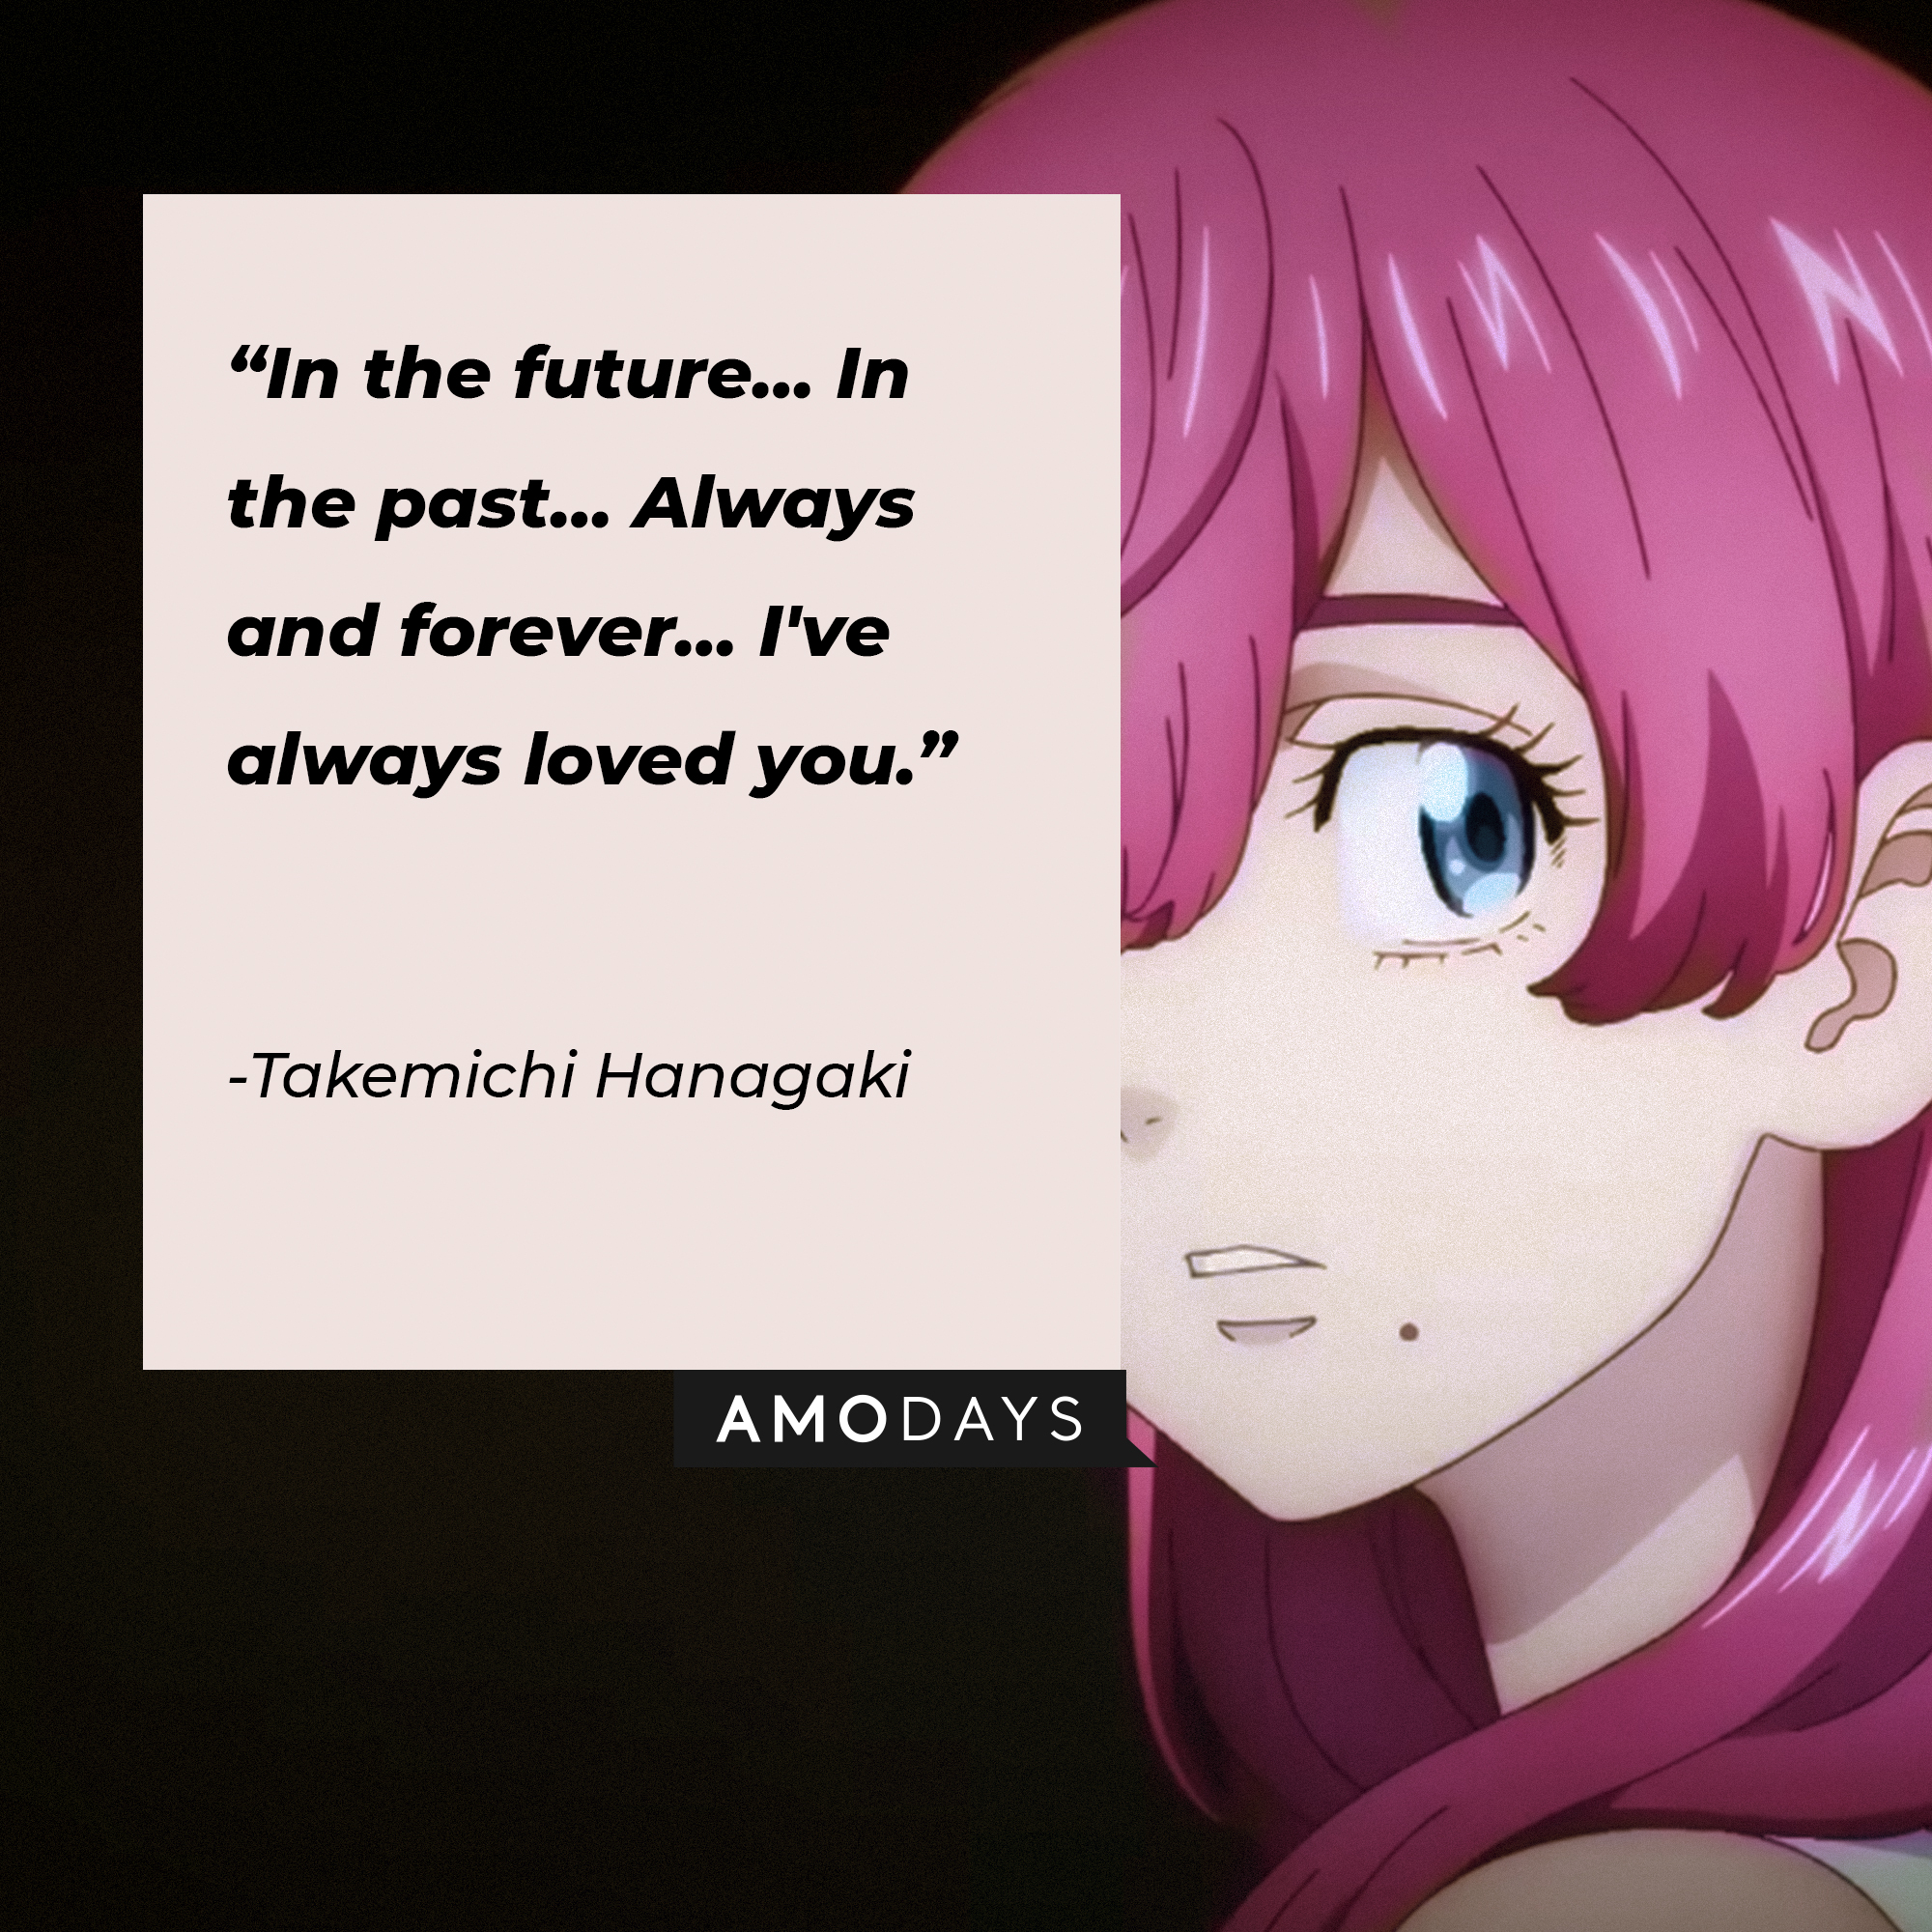 Takemichi Hanagaki's quote: "In the future… In the past… Always and forever… I've always loved you." | Source: Youtube.com/Crunchyroll Collection